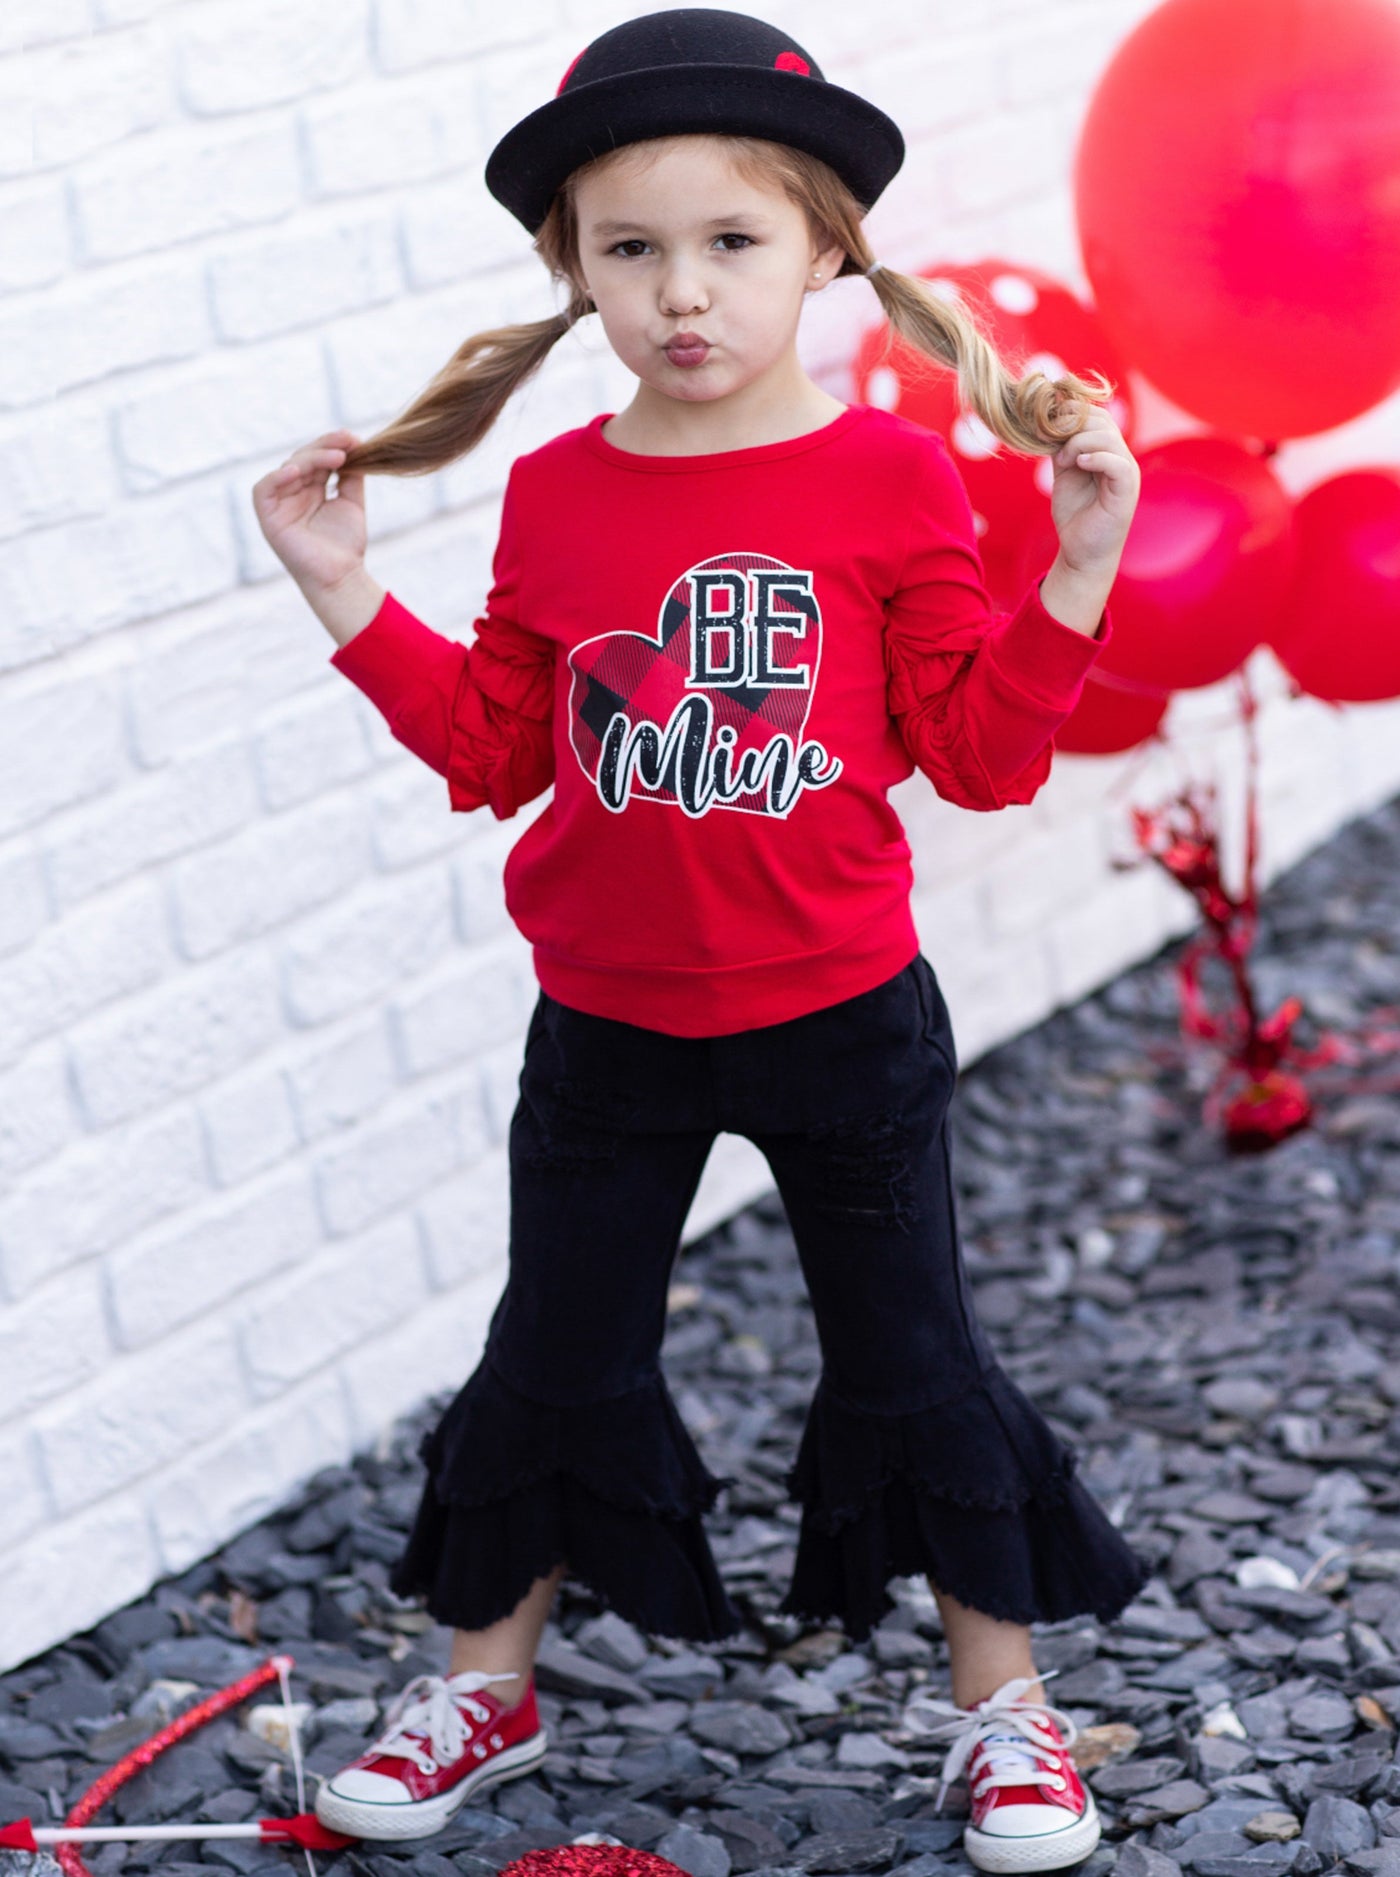 Girls Valentine's Outfits | Be Mine Ruffle Top & Bell Bottom Jeans Set